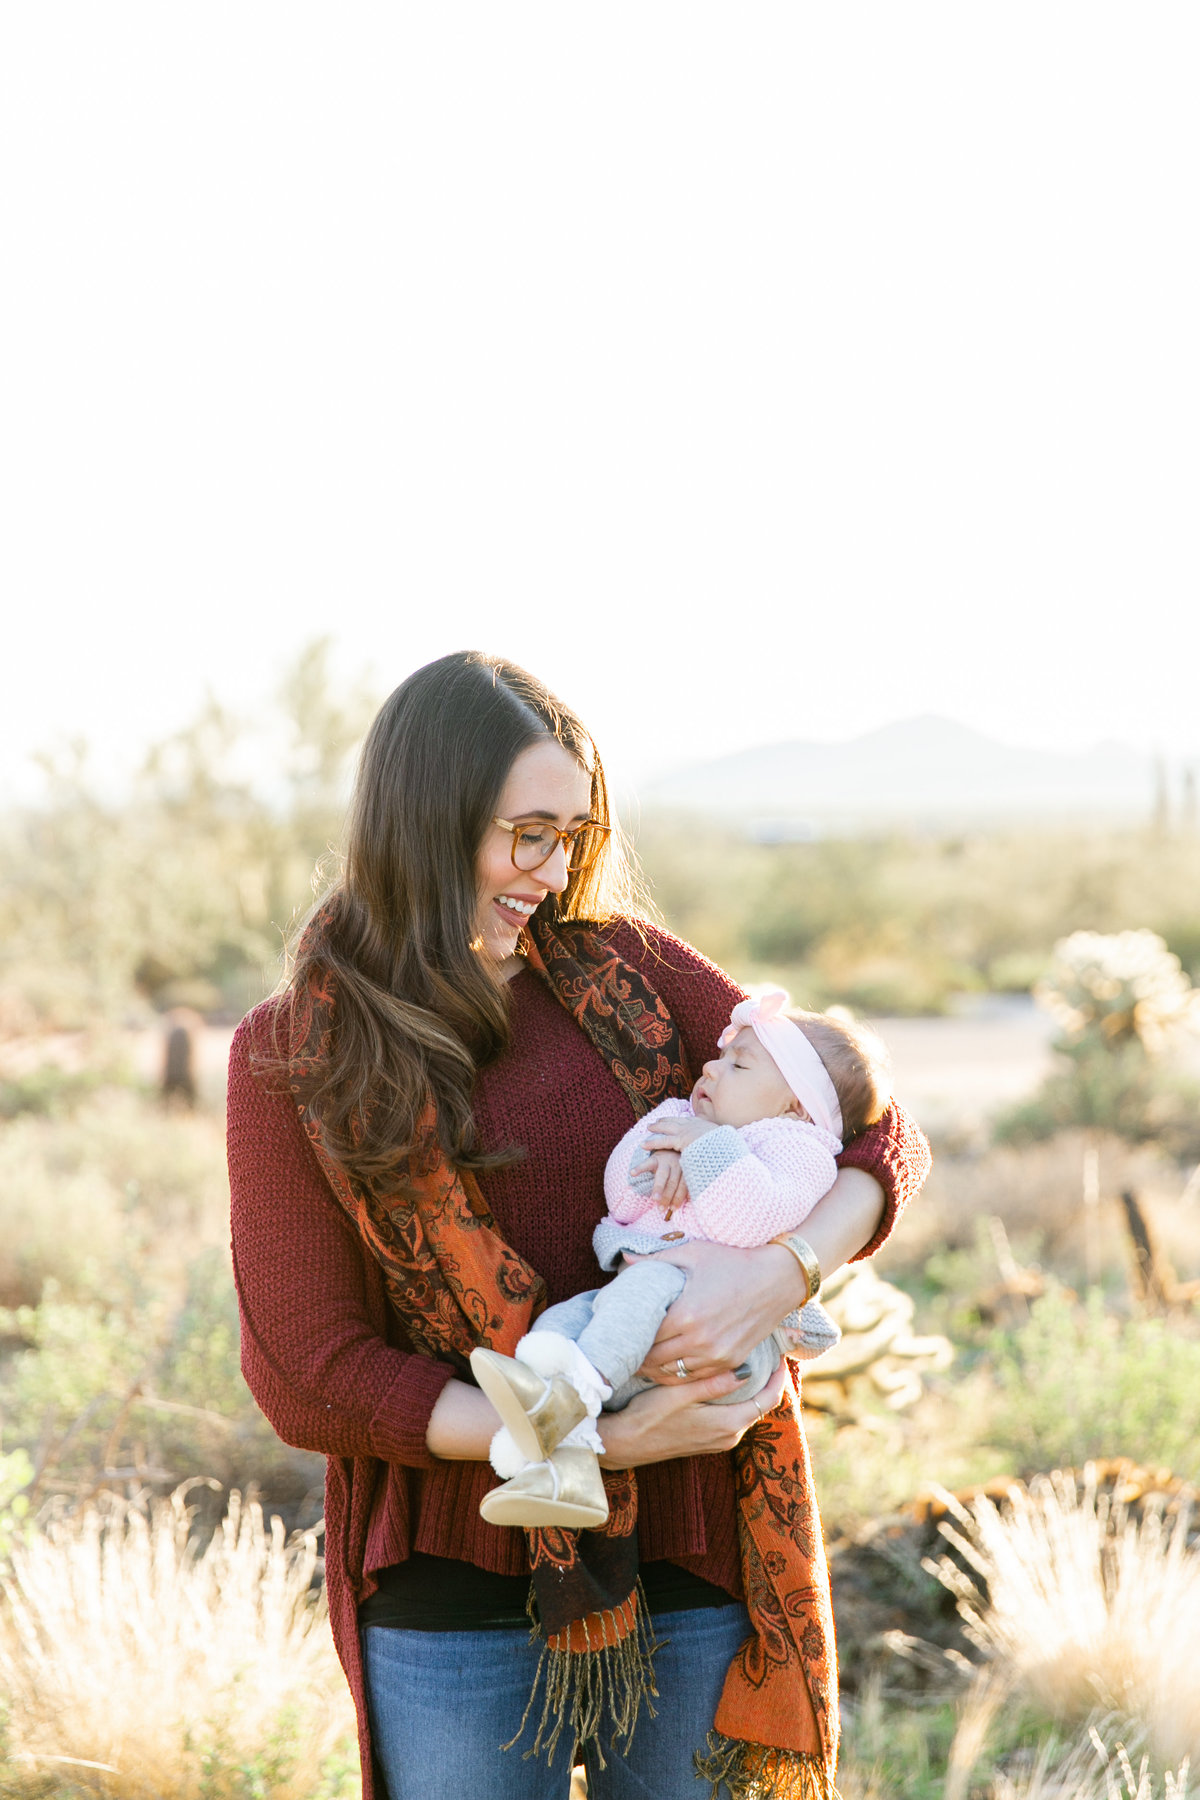 Karlie Colleen Photography - Scottsdale Family Photography - Lauren & Family-32